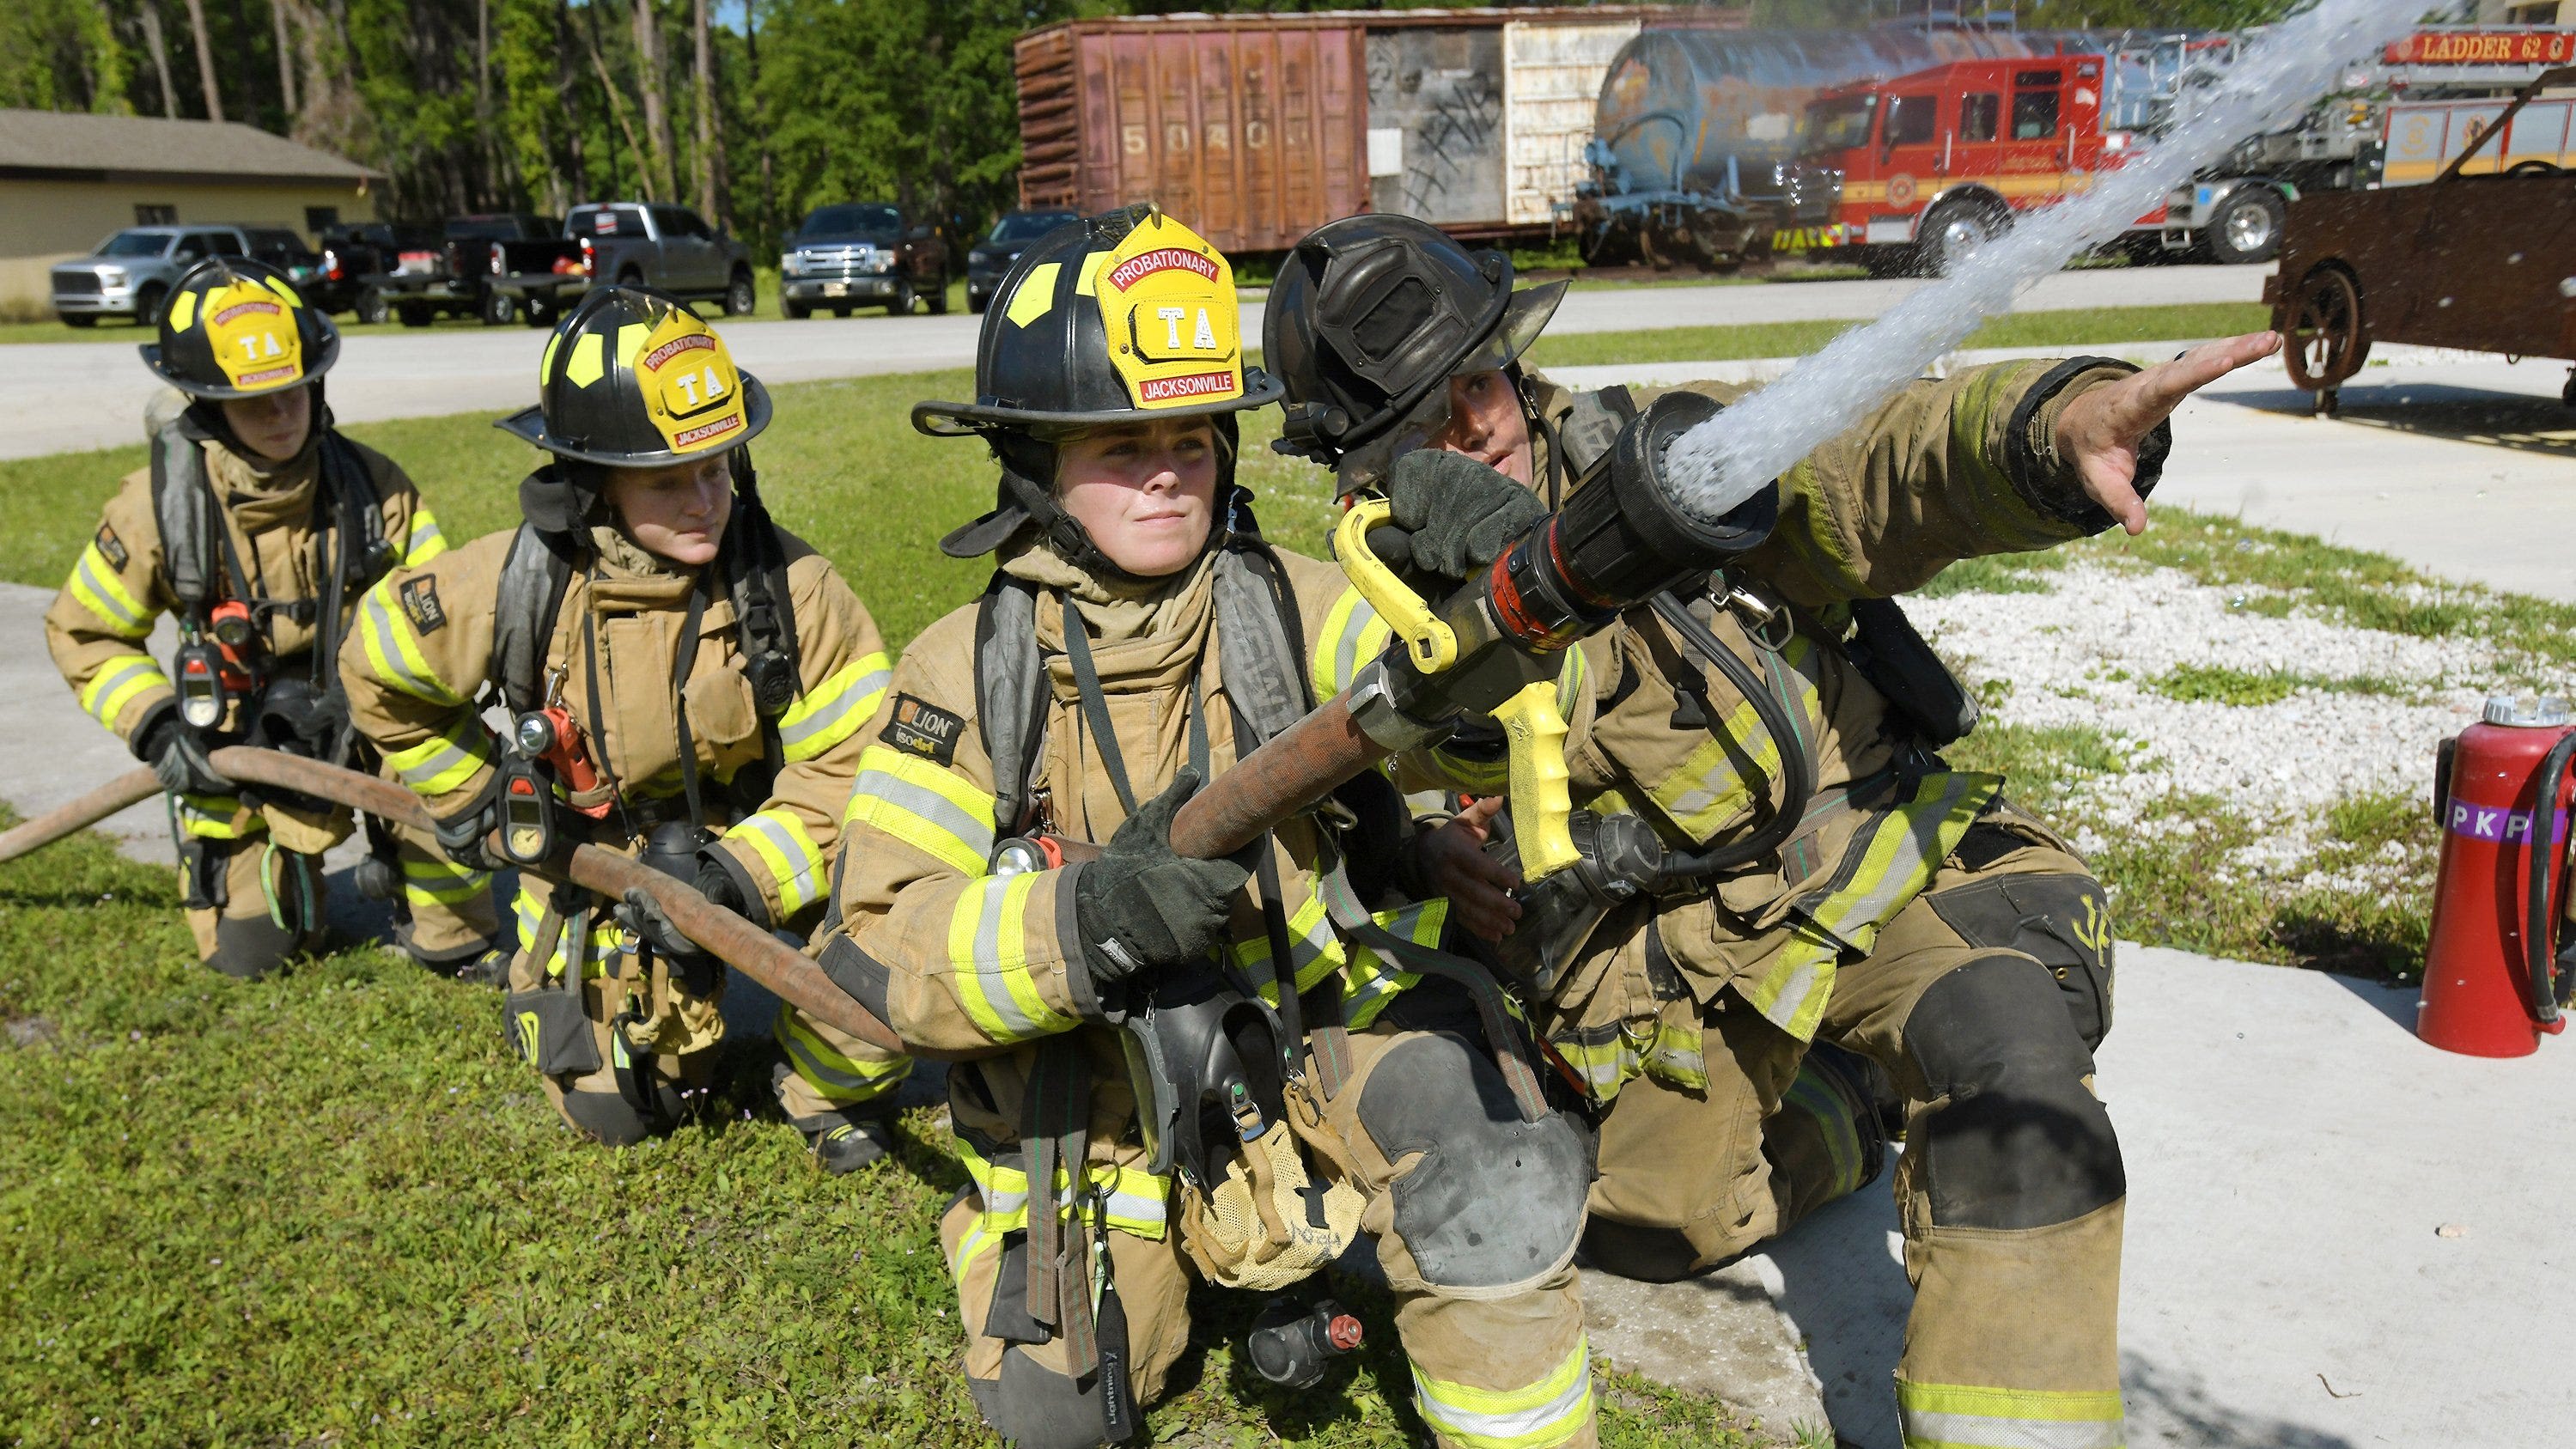 Number of women firefighters in Jacksonville outpaces the national average, is on the rise